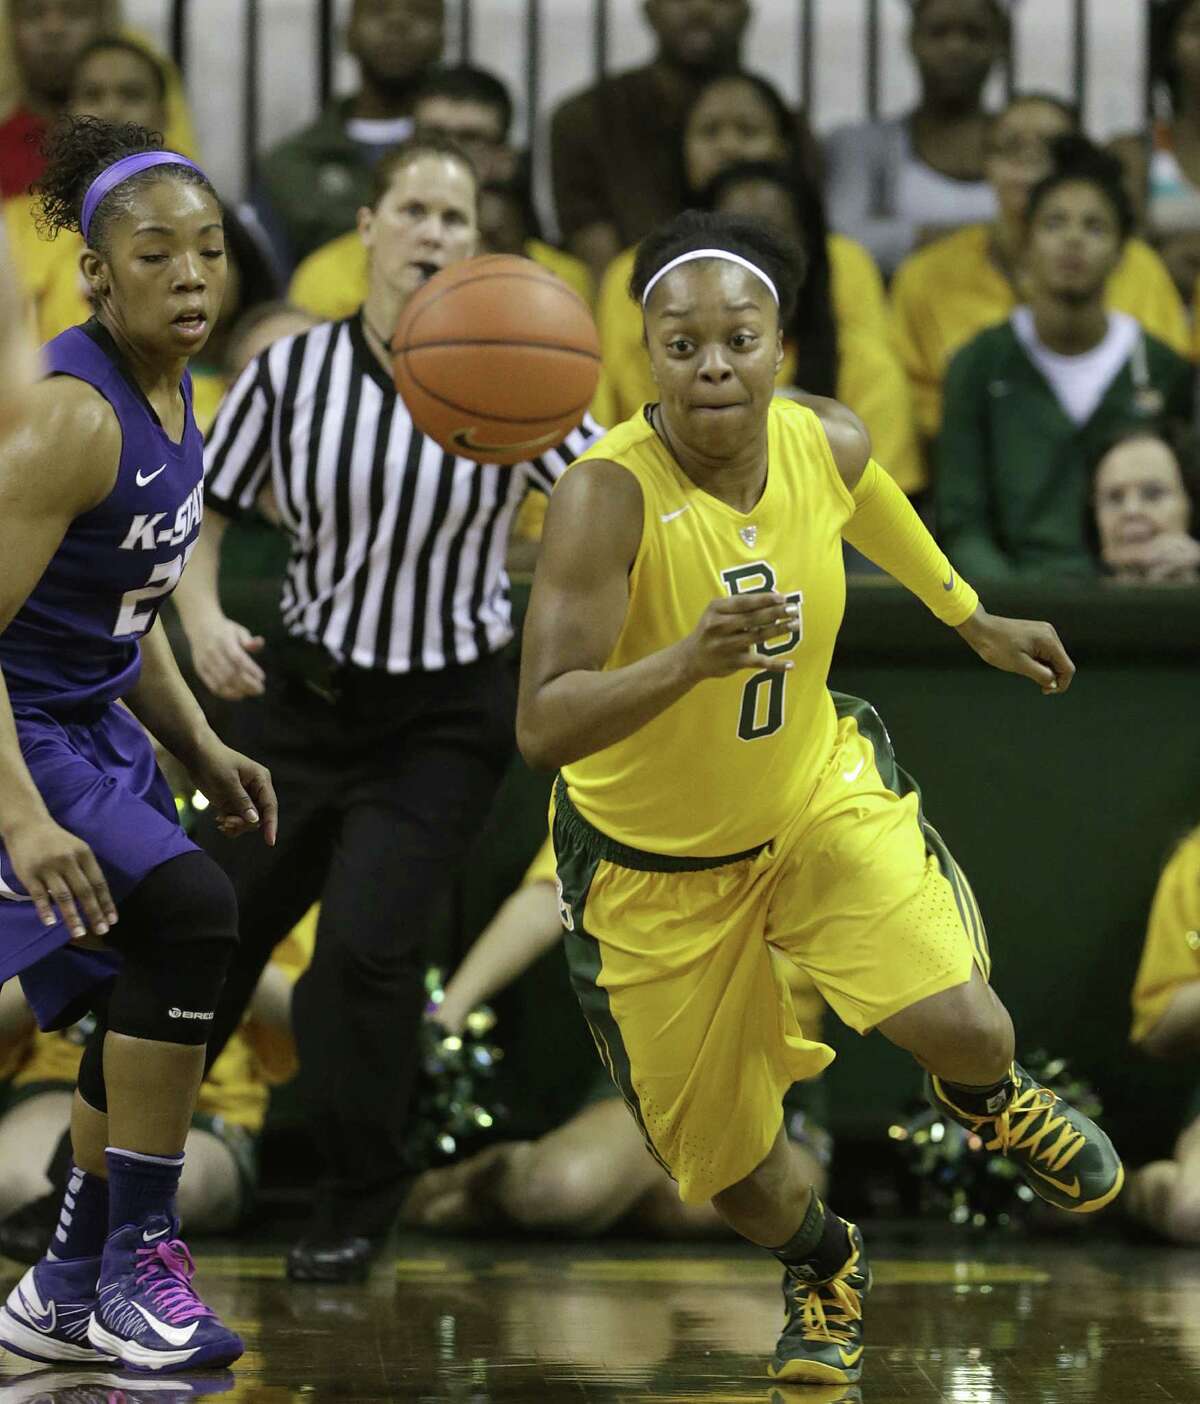 Baylor's Odyssey Sims averages 12.5 points with a nearly 3-to-1 assist-to-turnover ratio.